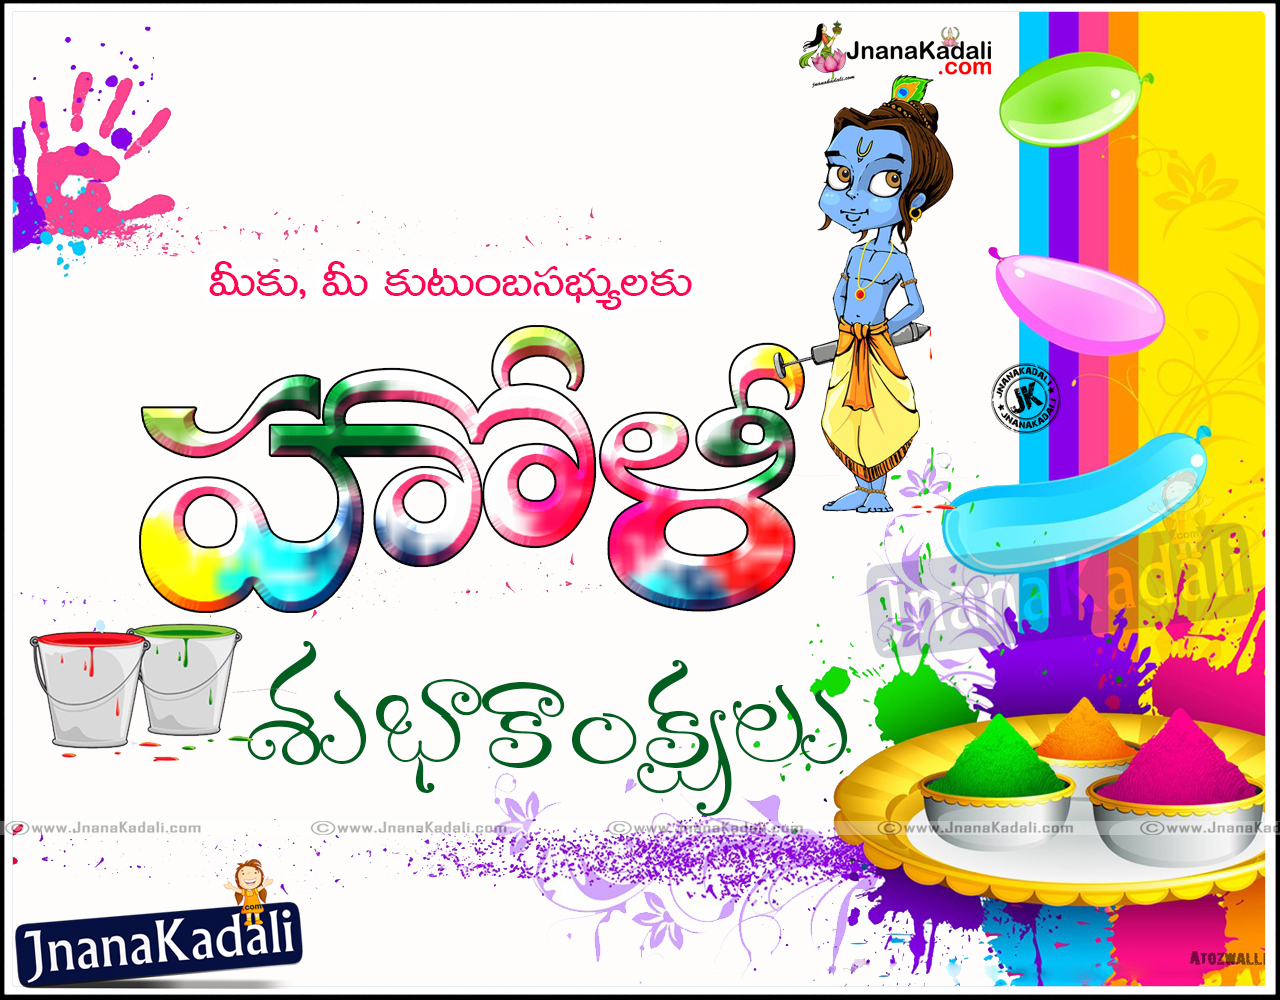 Happy Holi Telugu Quotations Wallpapers, Indian Festival - Happy Holi Images 2019 - HD Wallpaper 